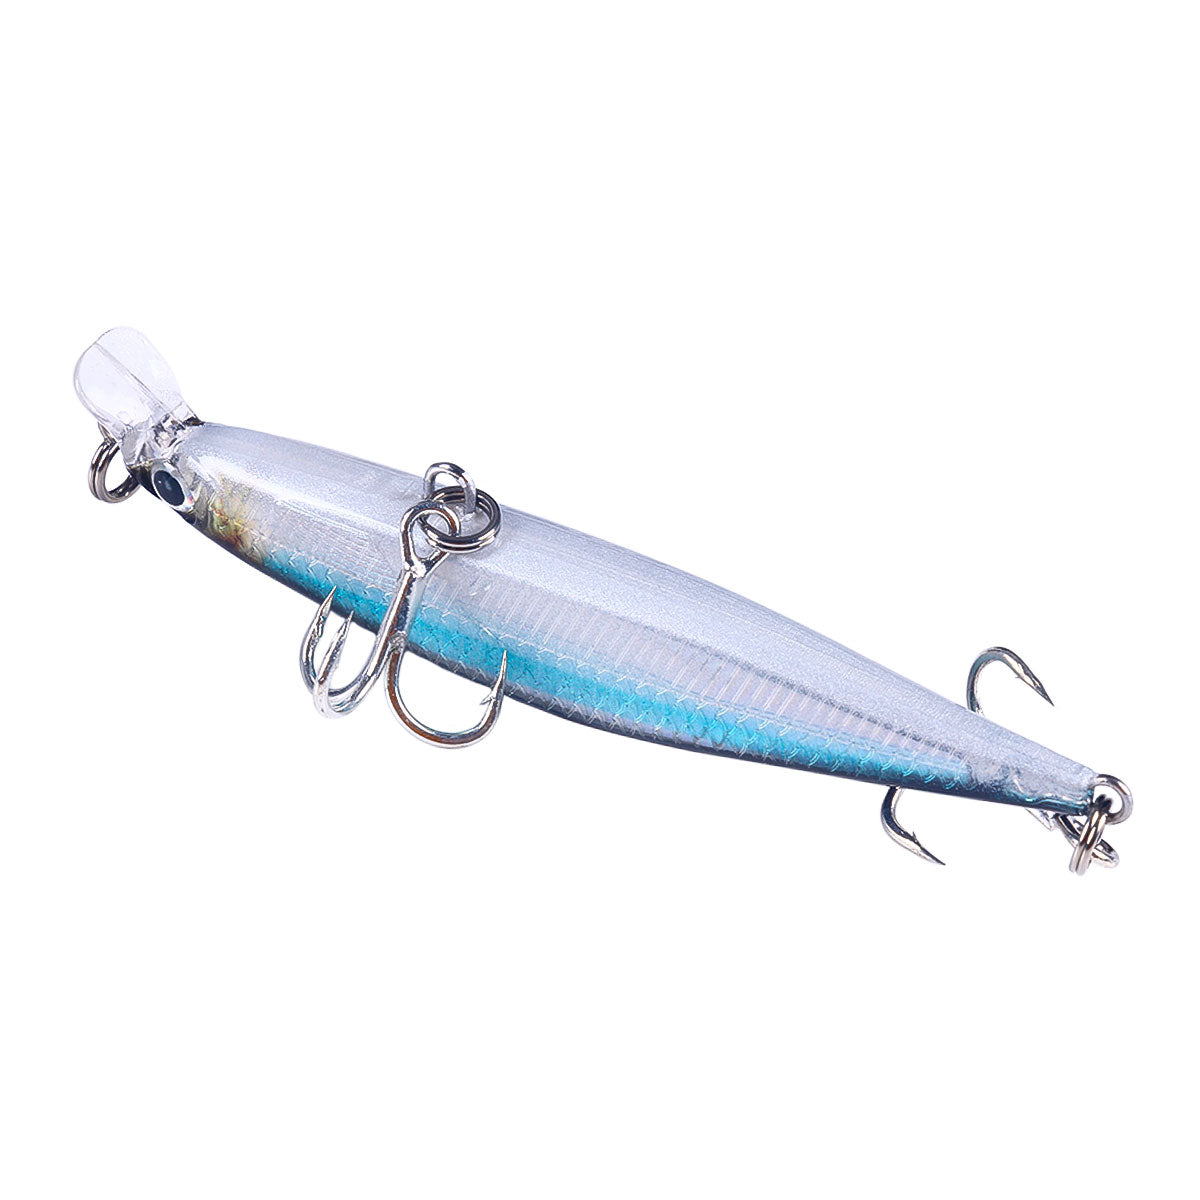 8CM 5.5G Long Casting Hard Minnow Lure Bait with Sharp Hook